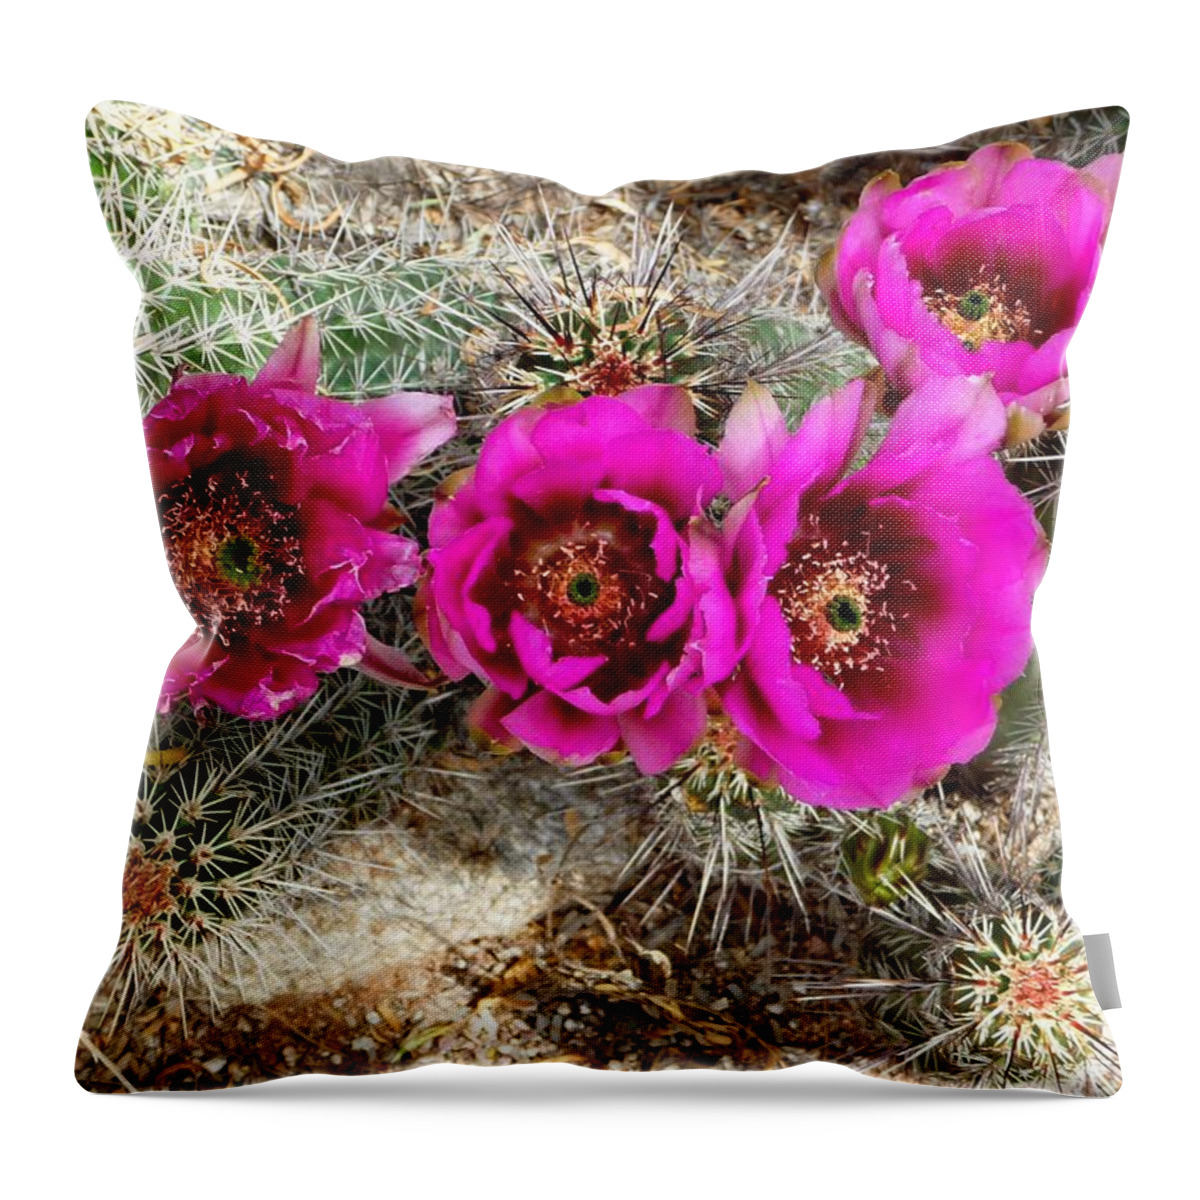 Cactus Throw Pillow featuring the photograph Blooming Cactus by Jo Sheehan